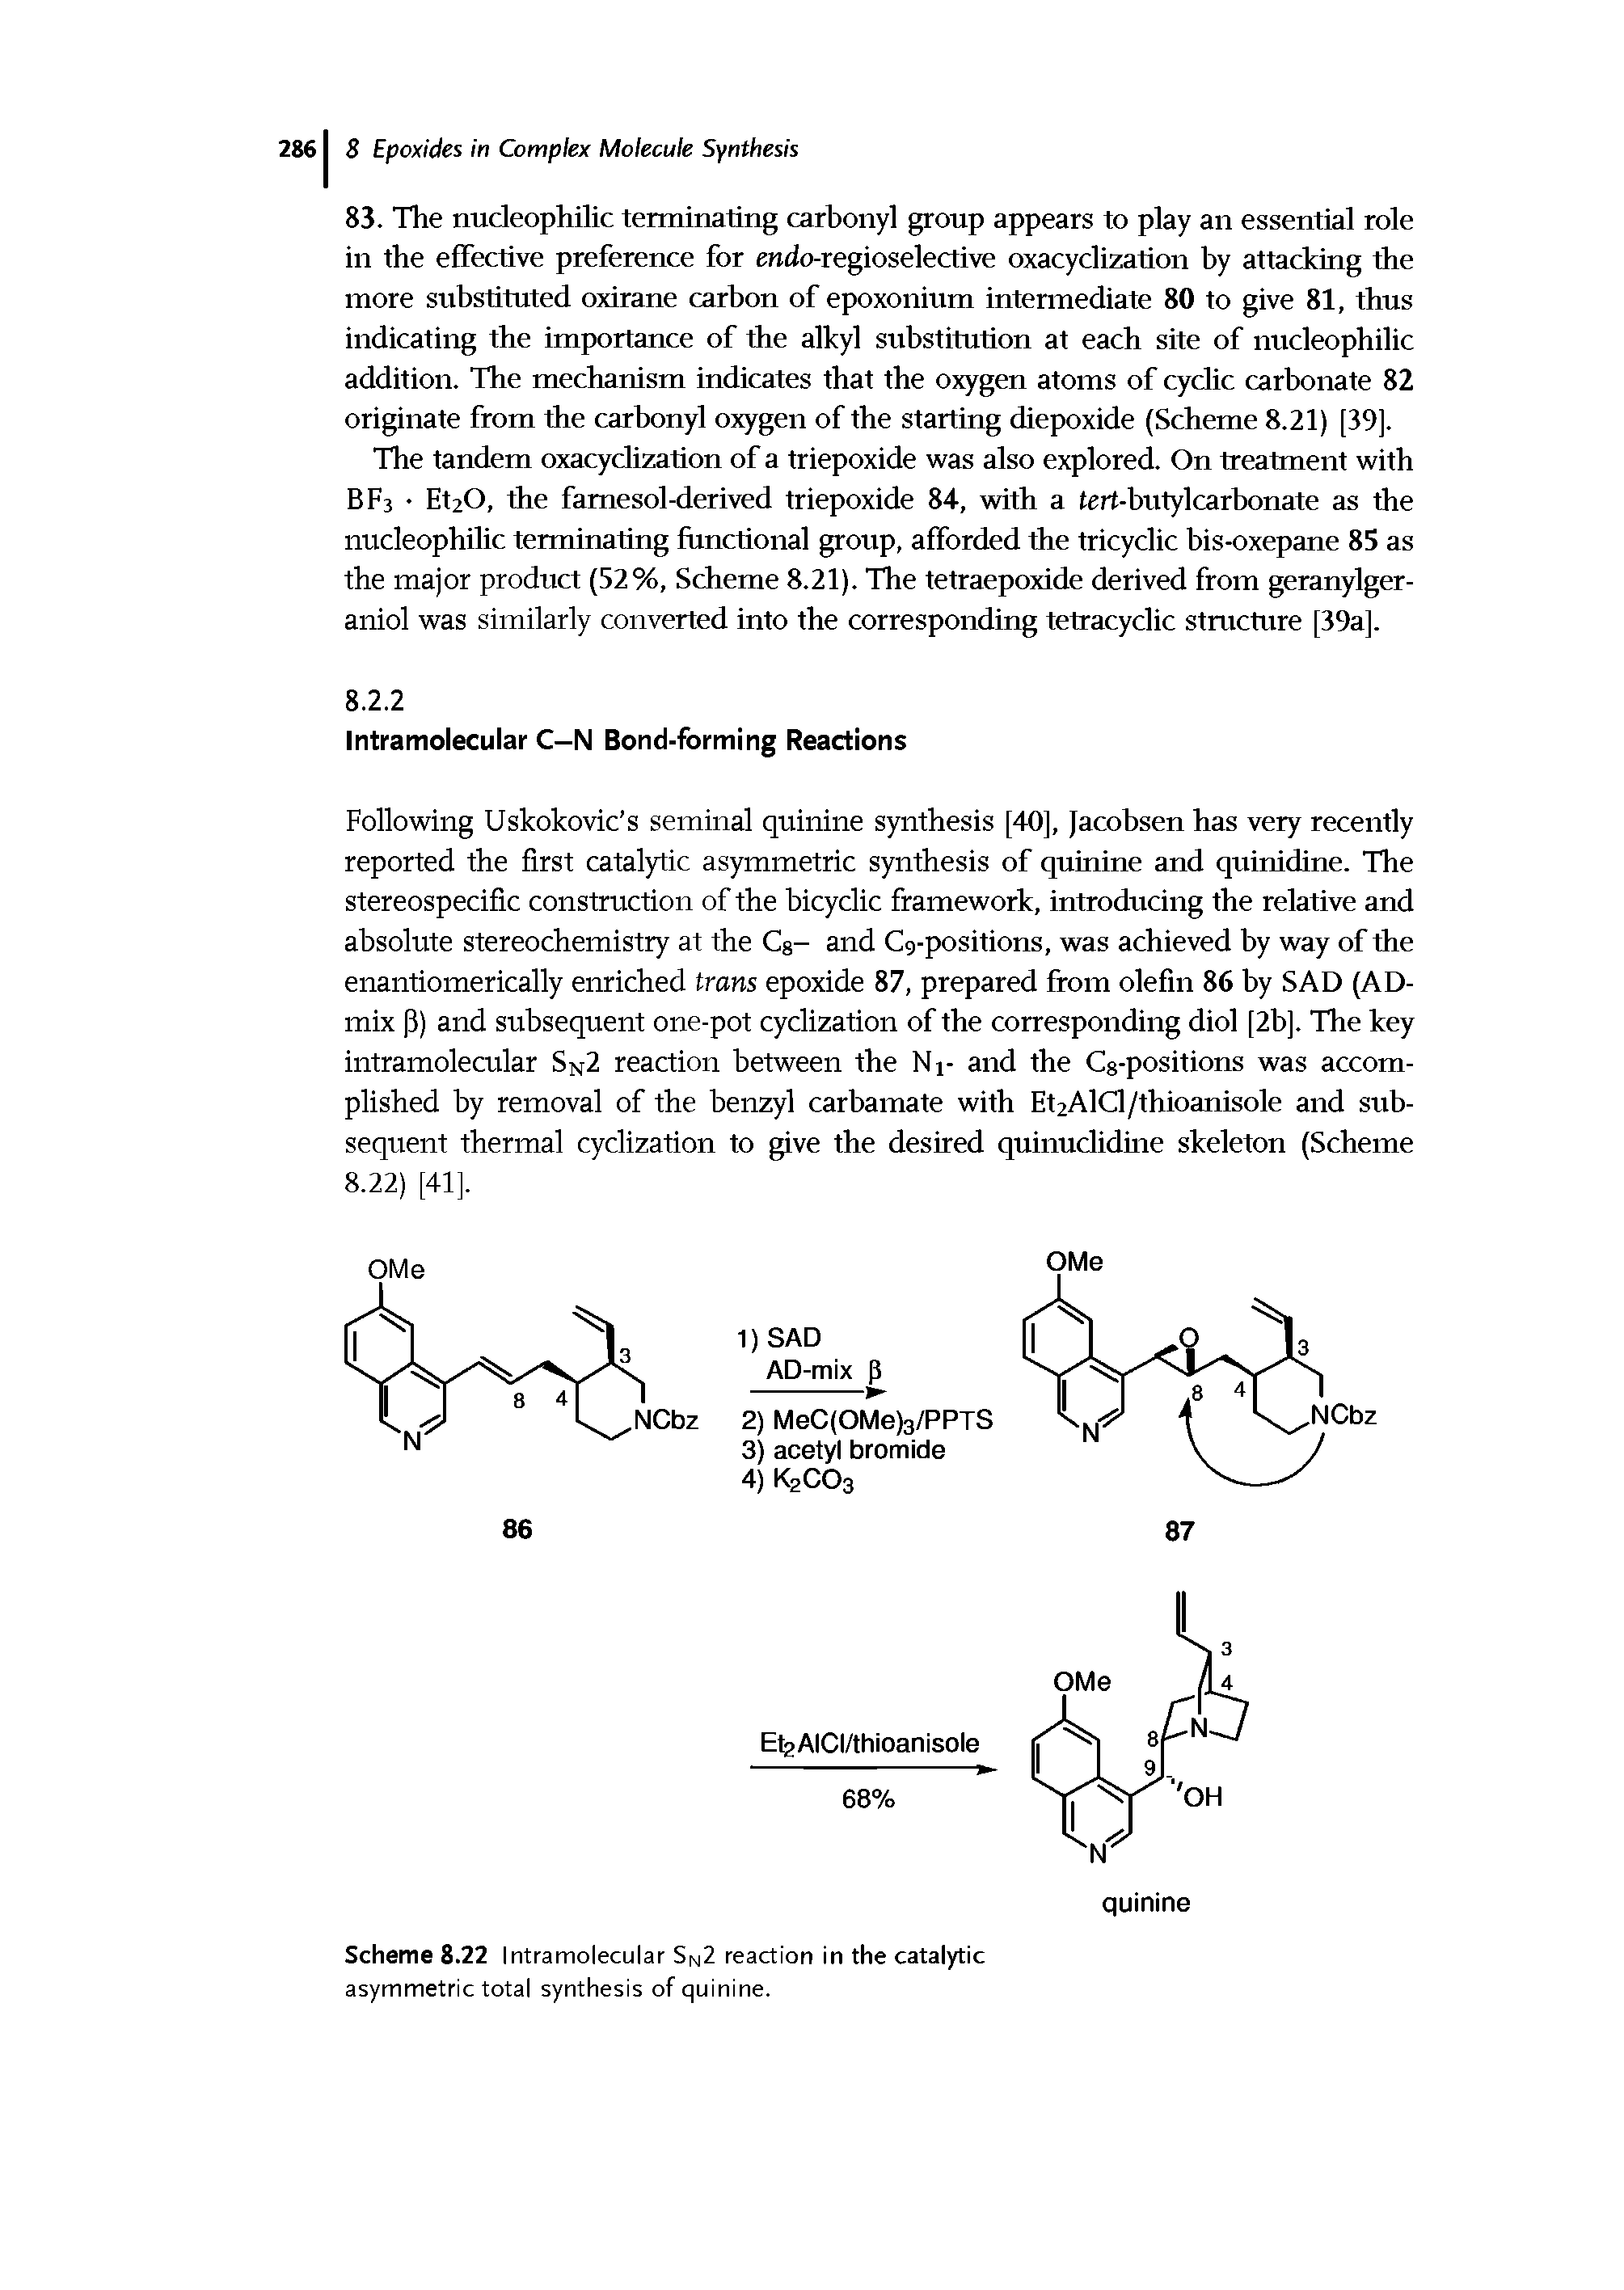 Scheme 8.22 Intramolecular Sn2 reaction in the catalytic asymmetric total synthesis of quinine.